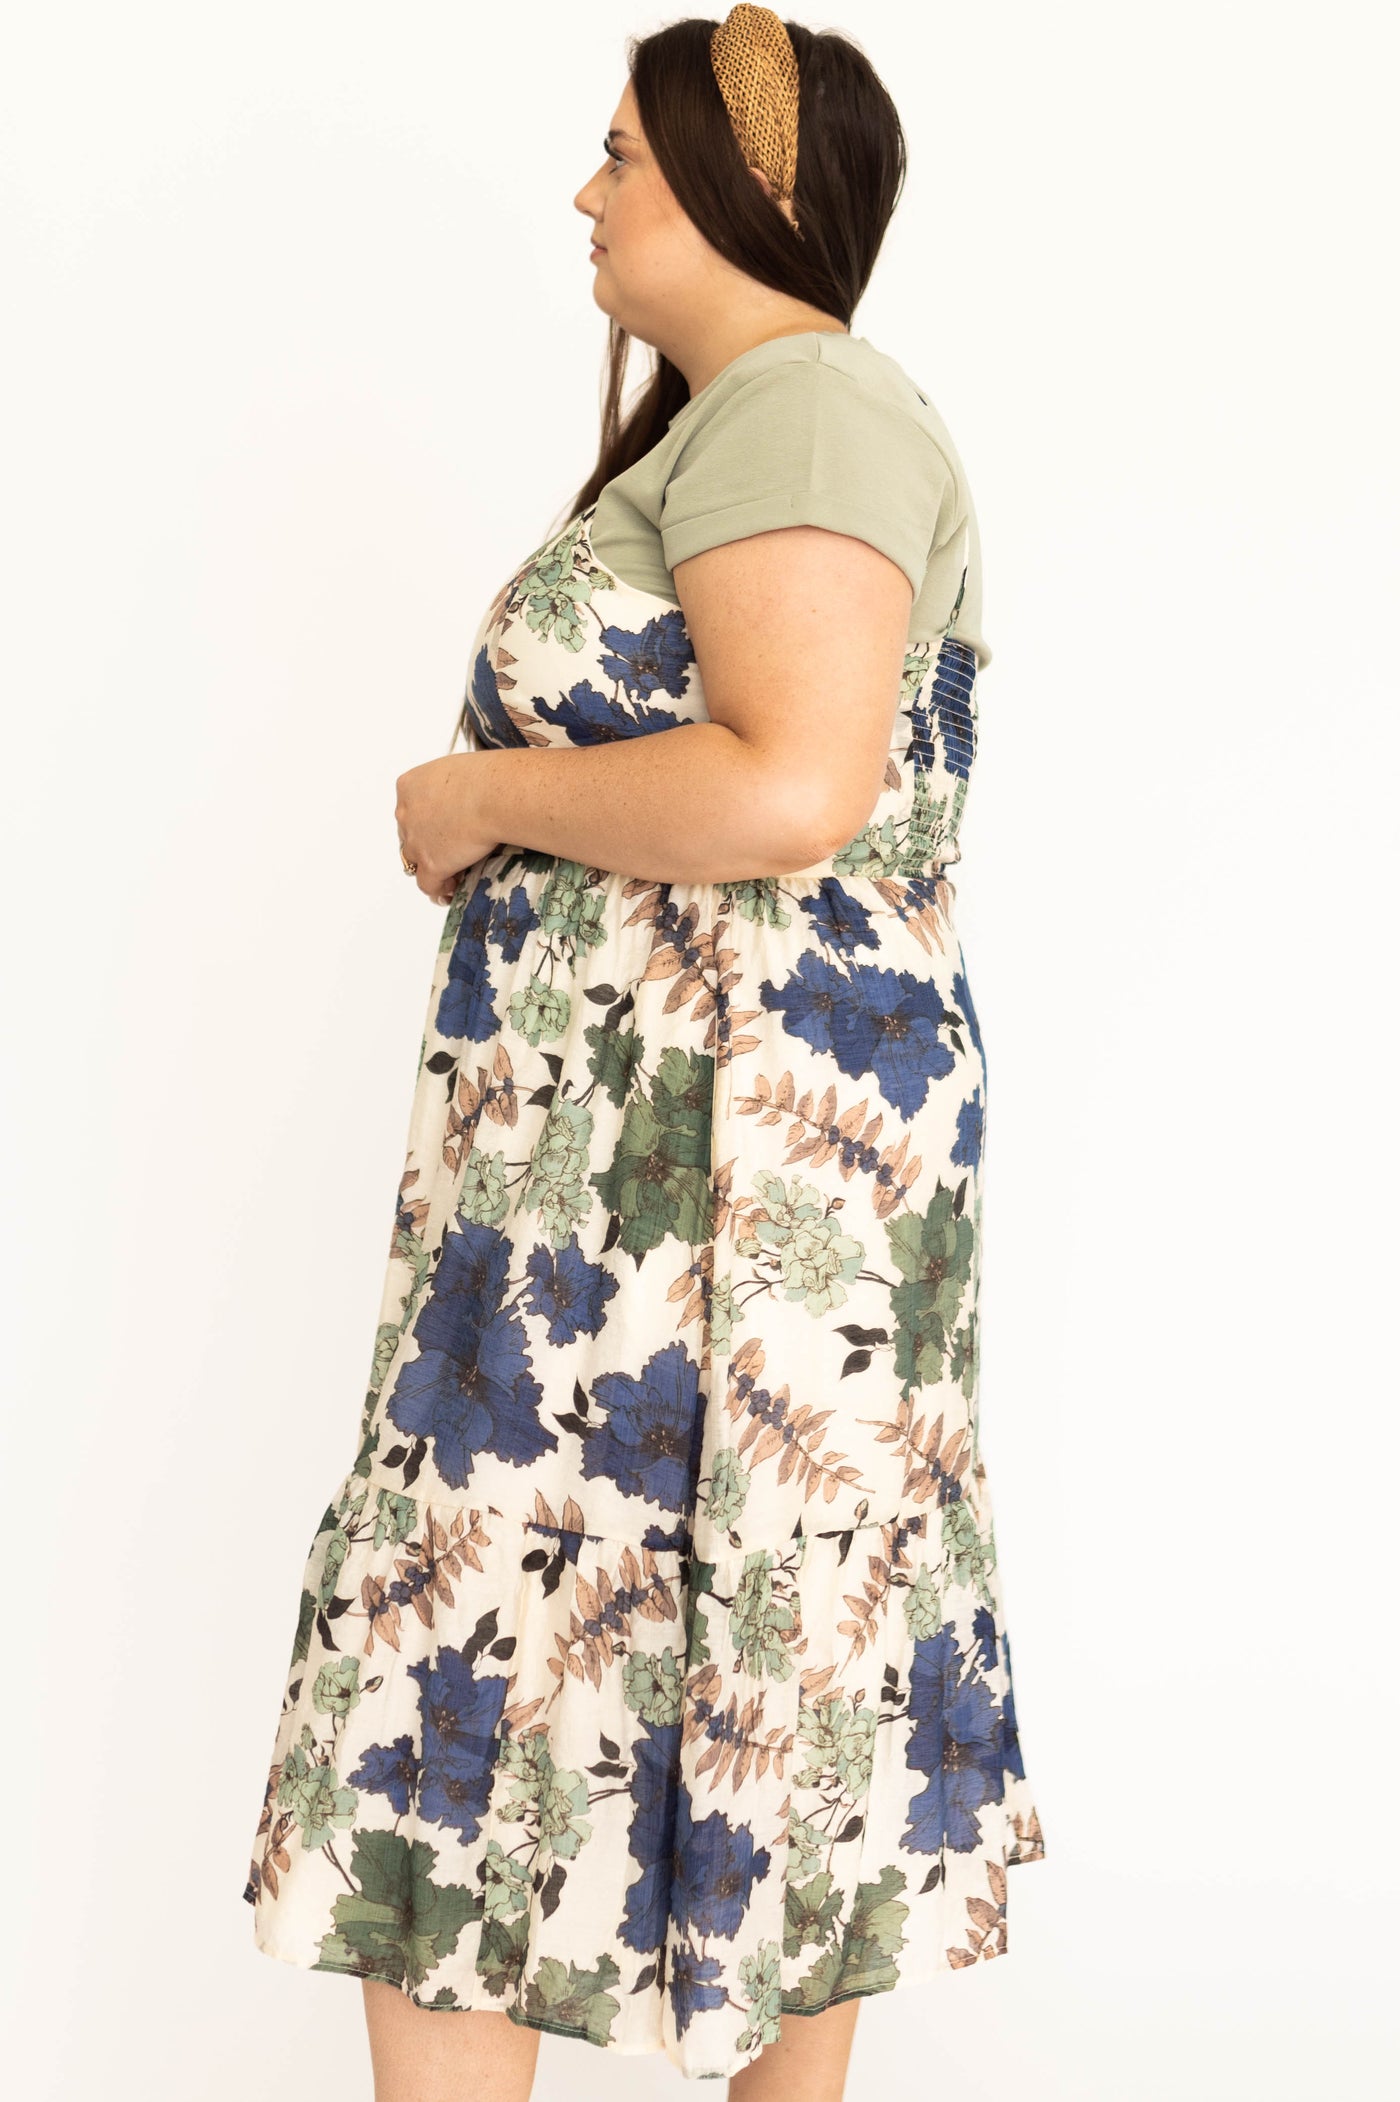 Plus size cream floral dress with skinny straps